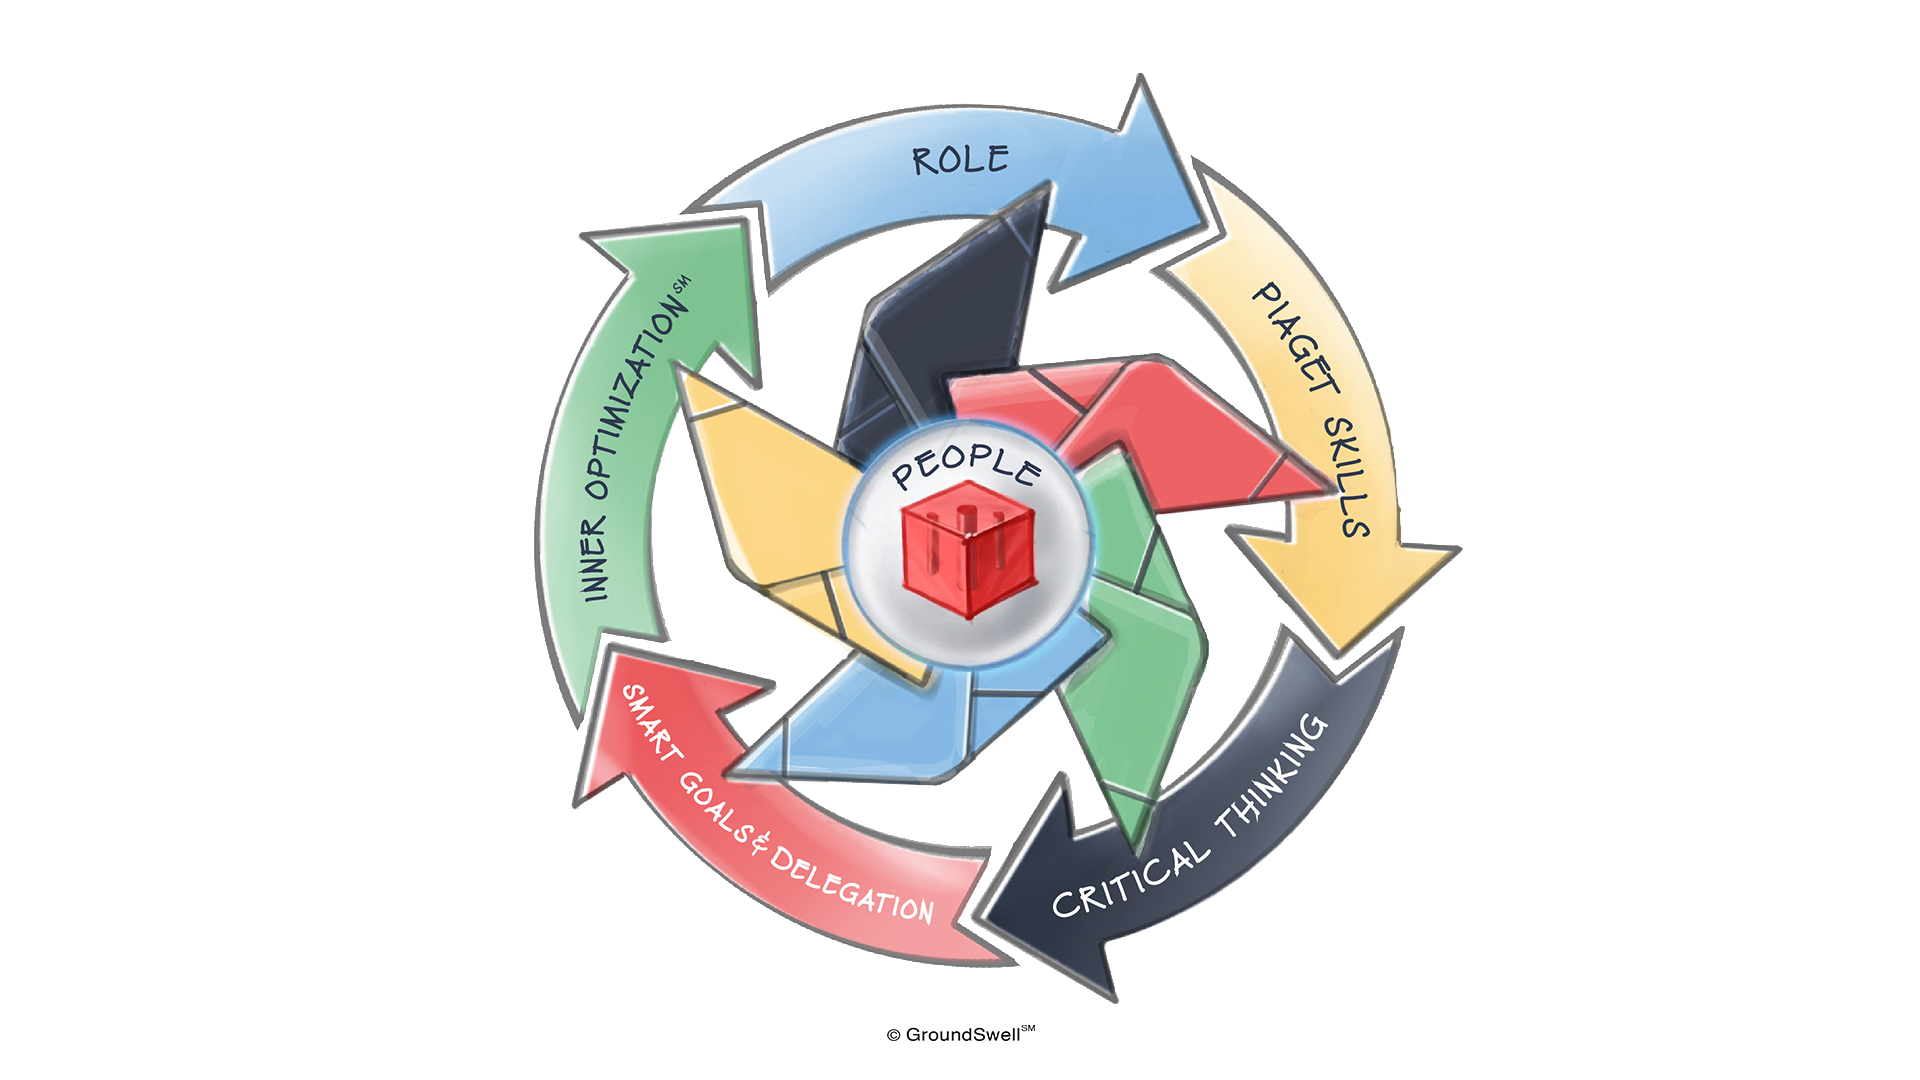 An illustration of a management and leadership development flywheel with a fractal inside of it along with a red cube in the center that highlights six key components to management and leadership development